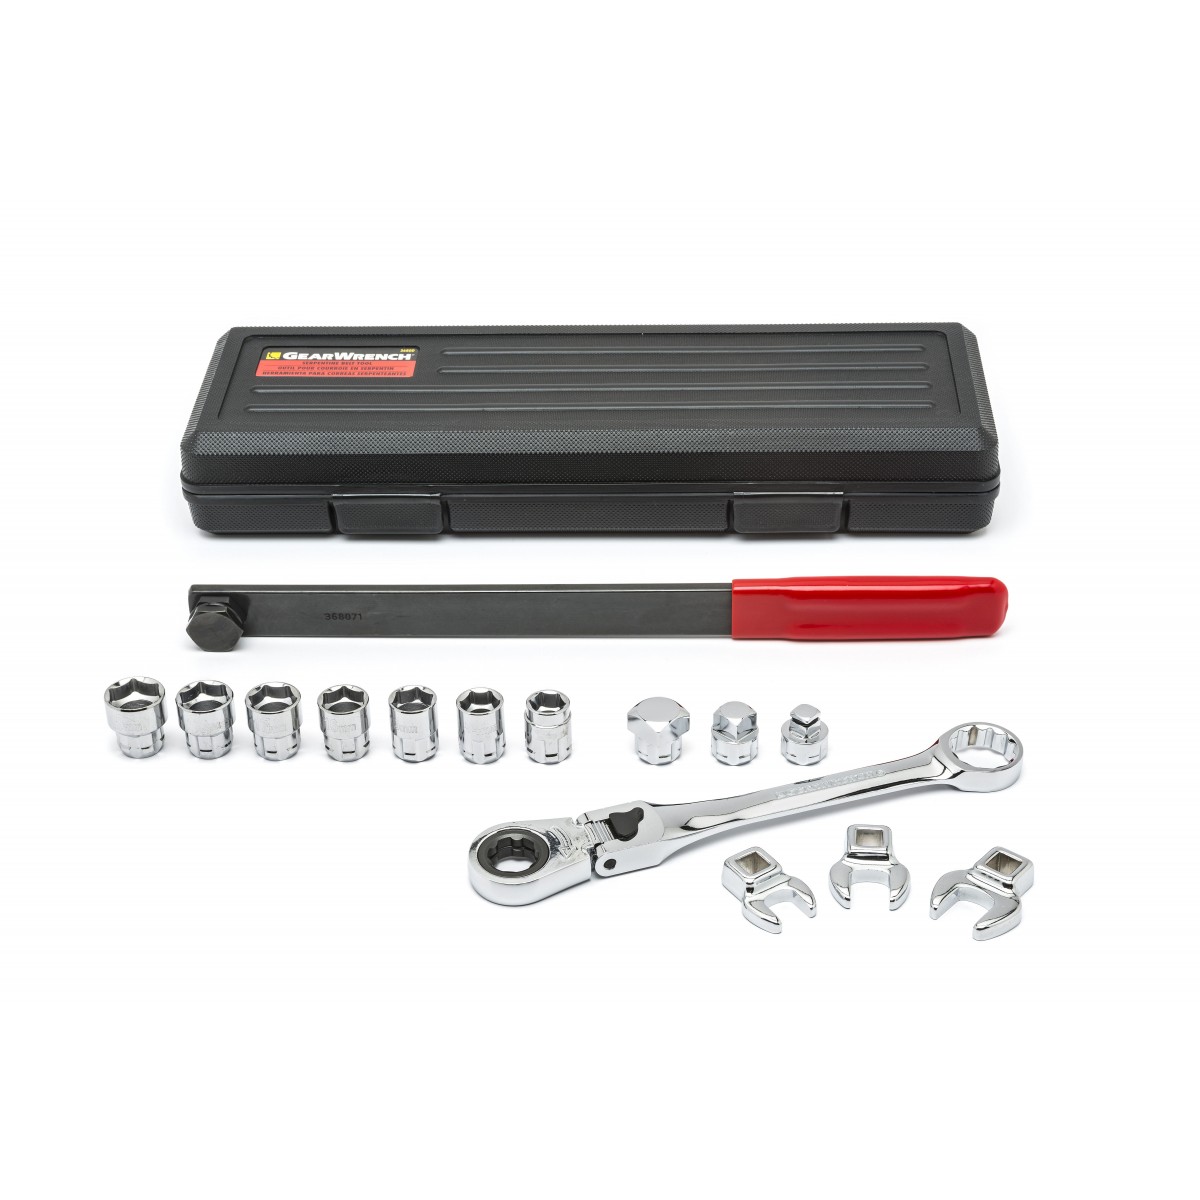 Picture of Apex Tool GWR89000 Serpentine Belt Tool Set with Locking Flex Head Ratcheting Wrench - 15 Piece